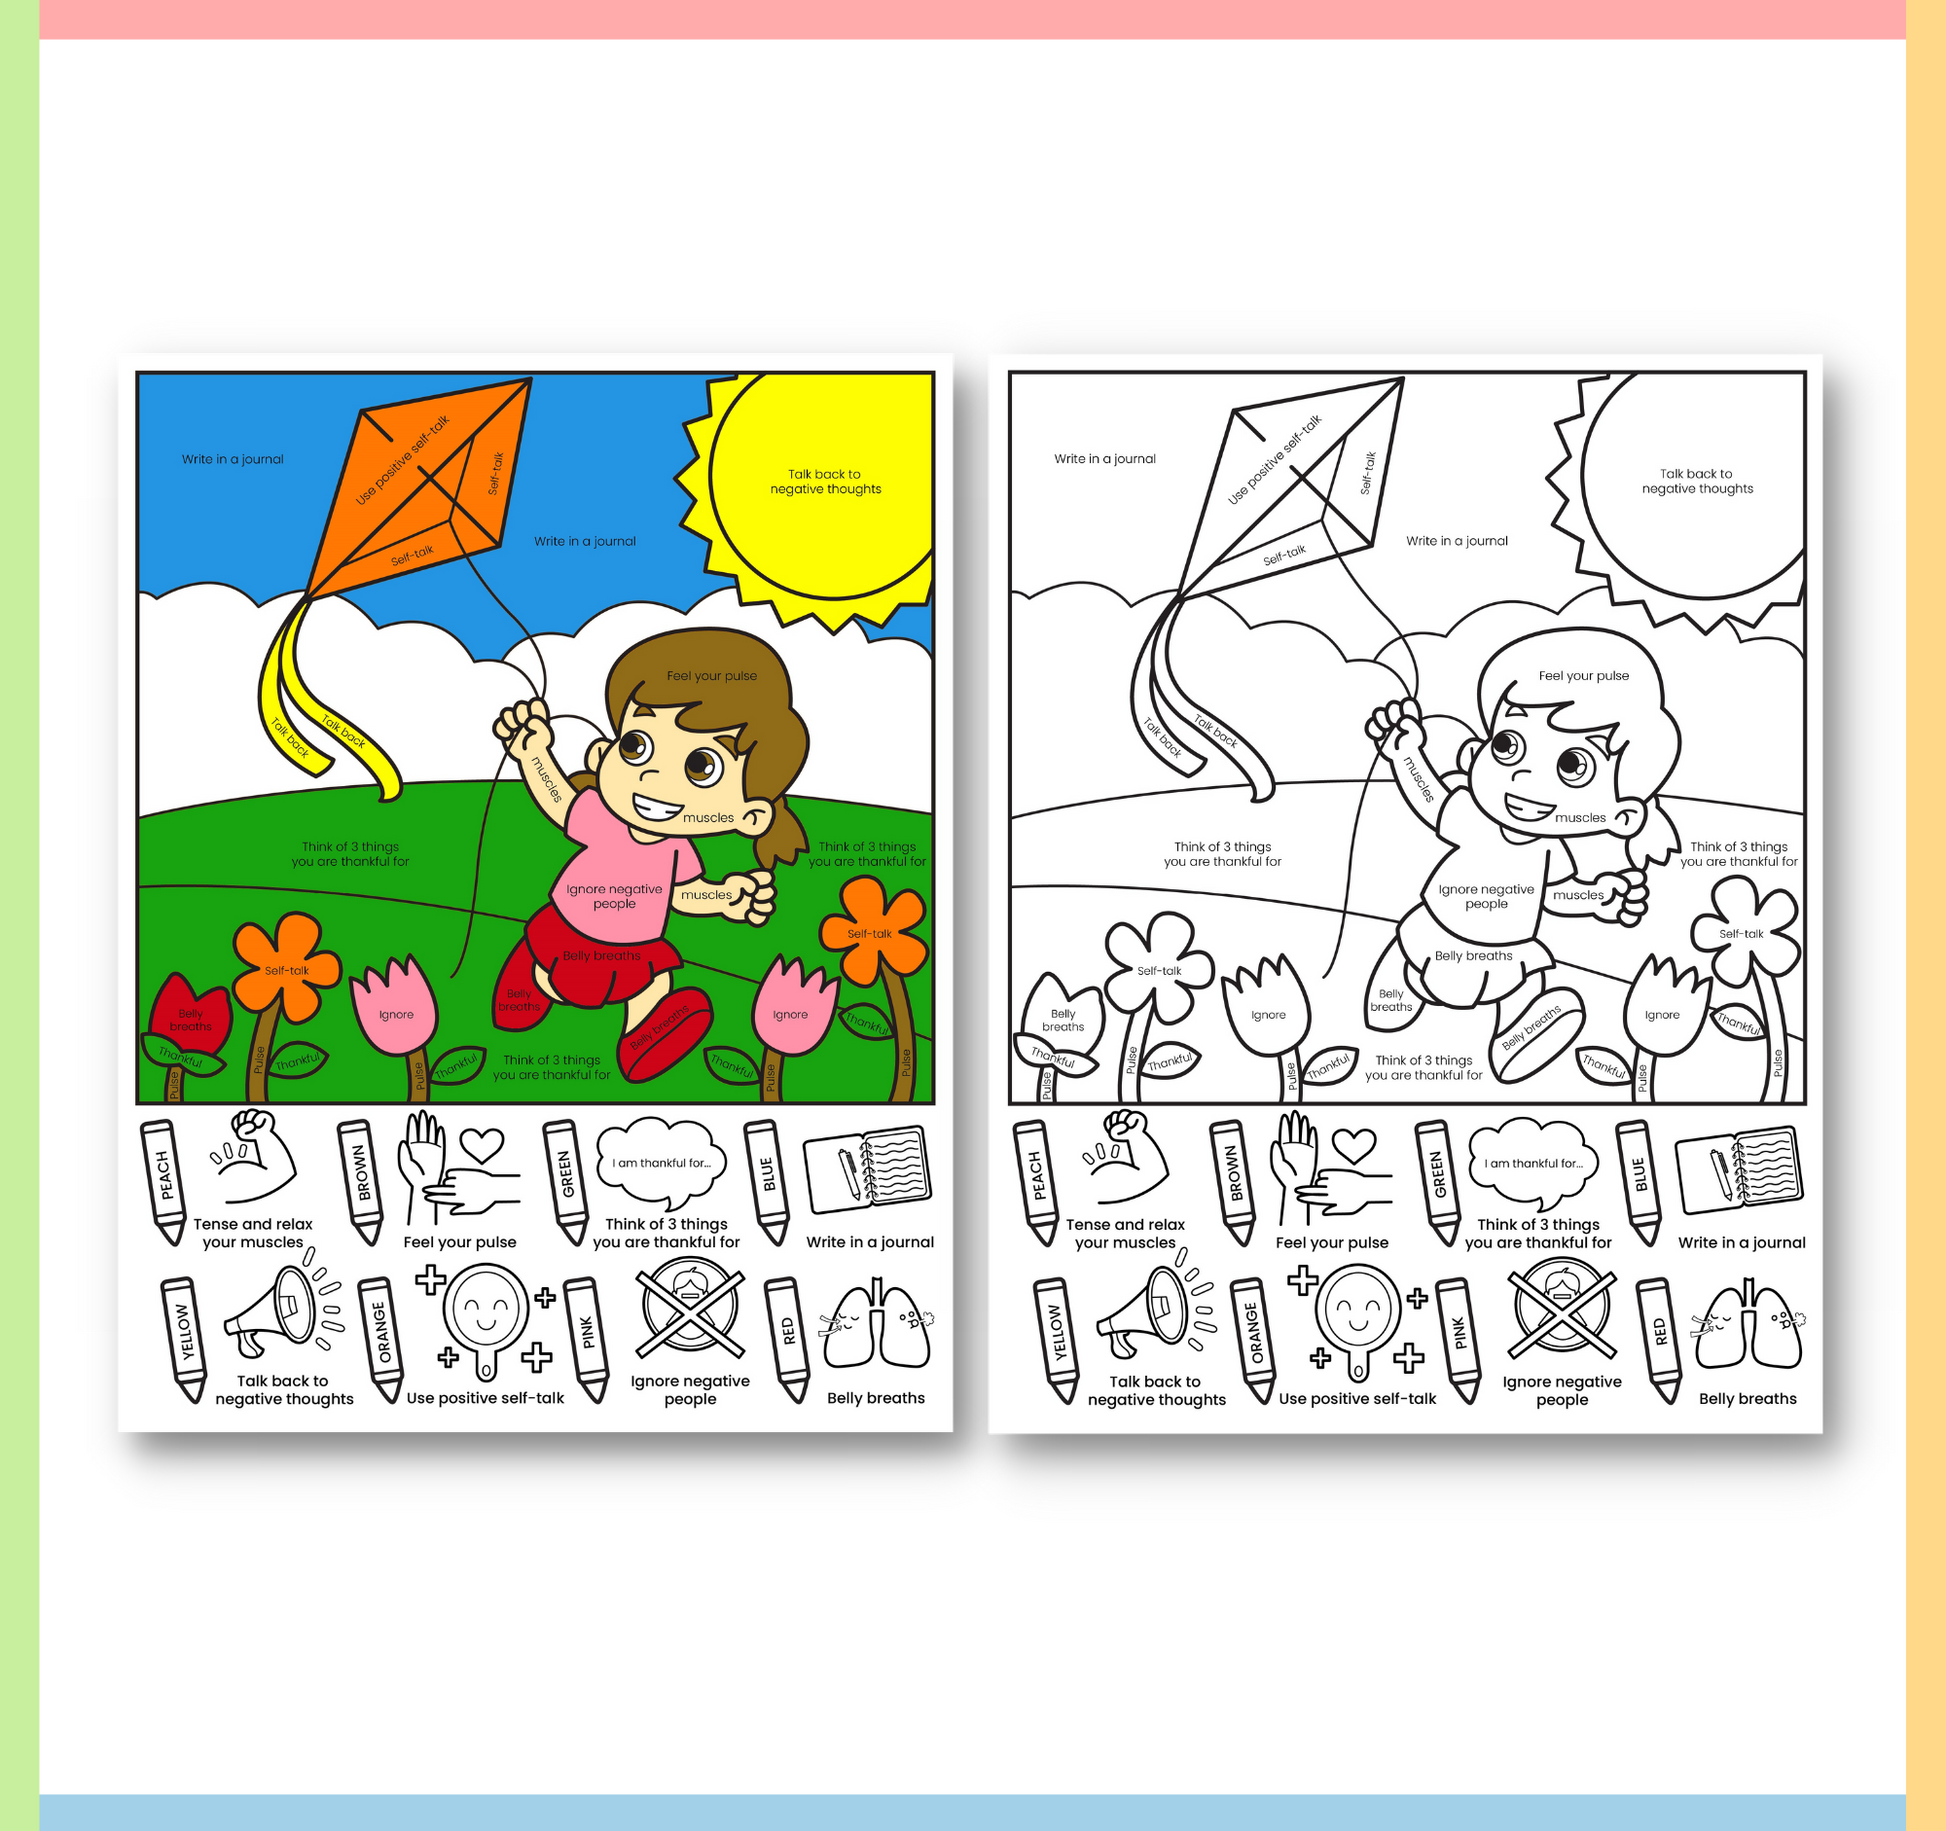 spring coloring pages for kids